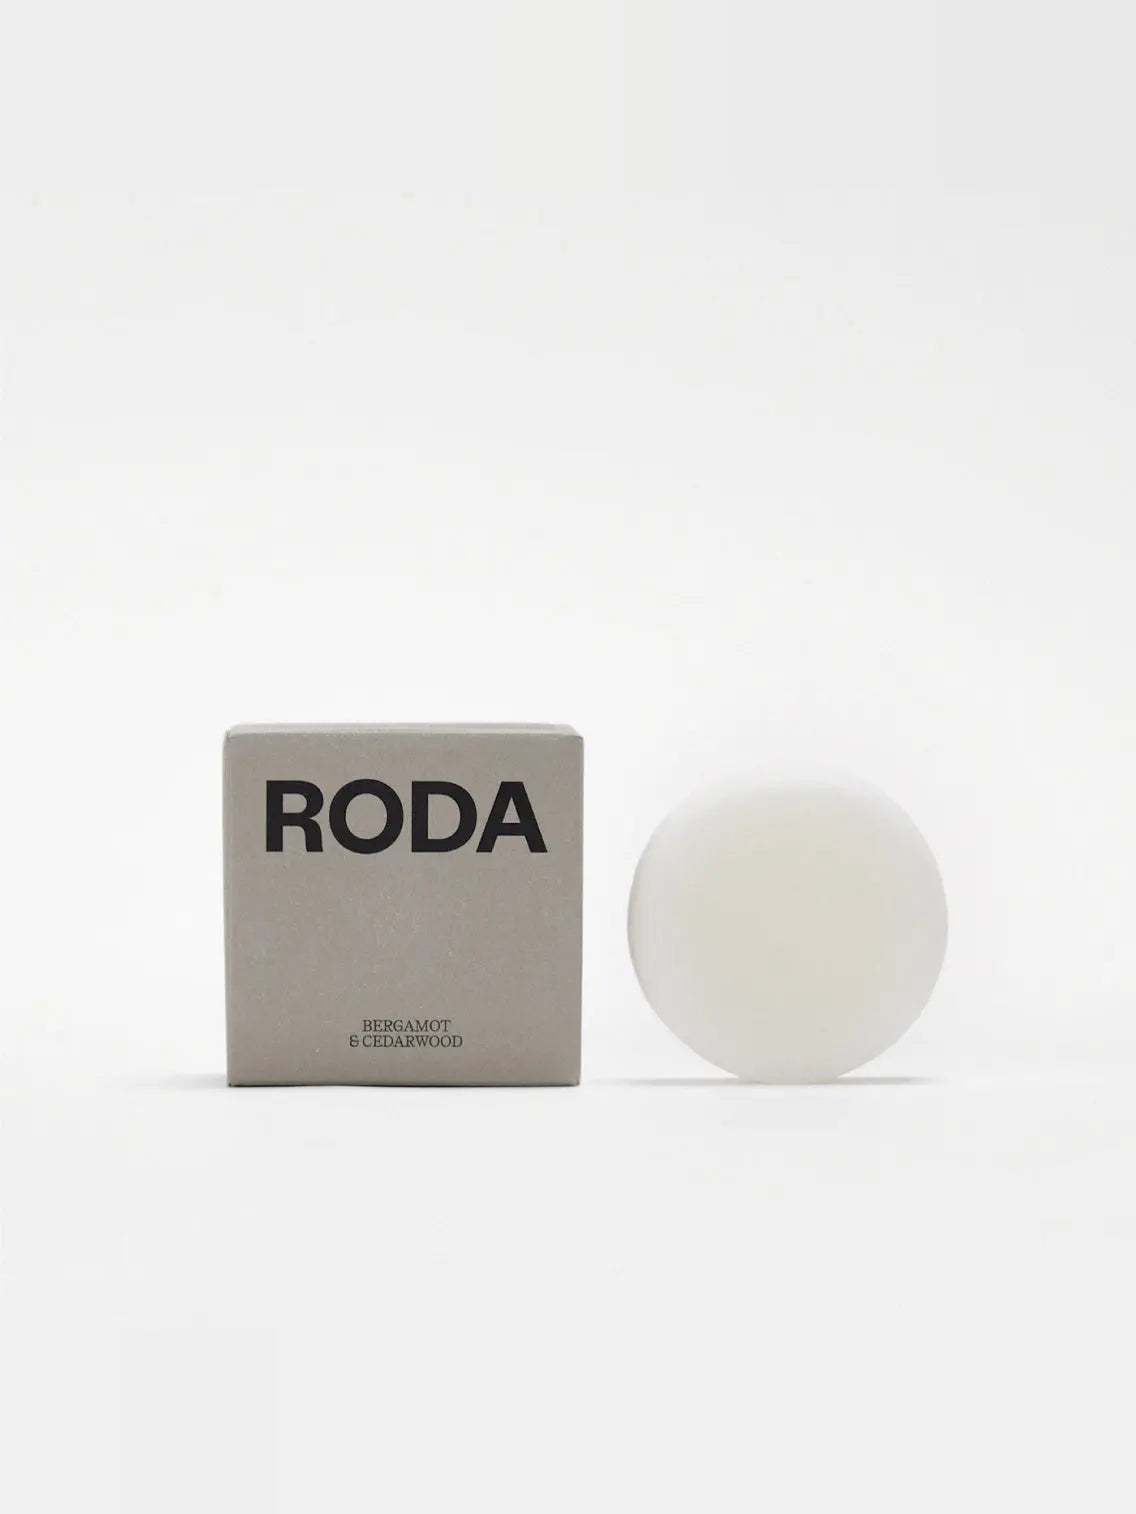 A round white conditioner bar sits next to a beige and gray box labeled "Roda," available exclusively at Bassalstore. Text on the box reads "Bergamot & Cedarwood." The background is plain white.